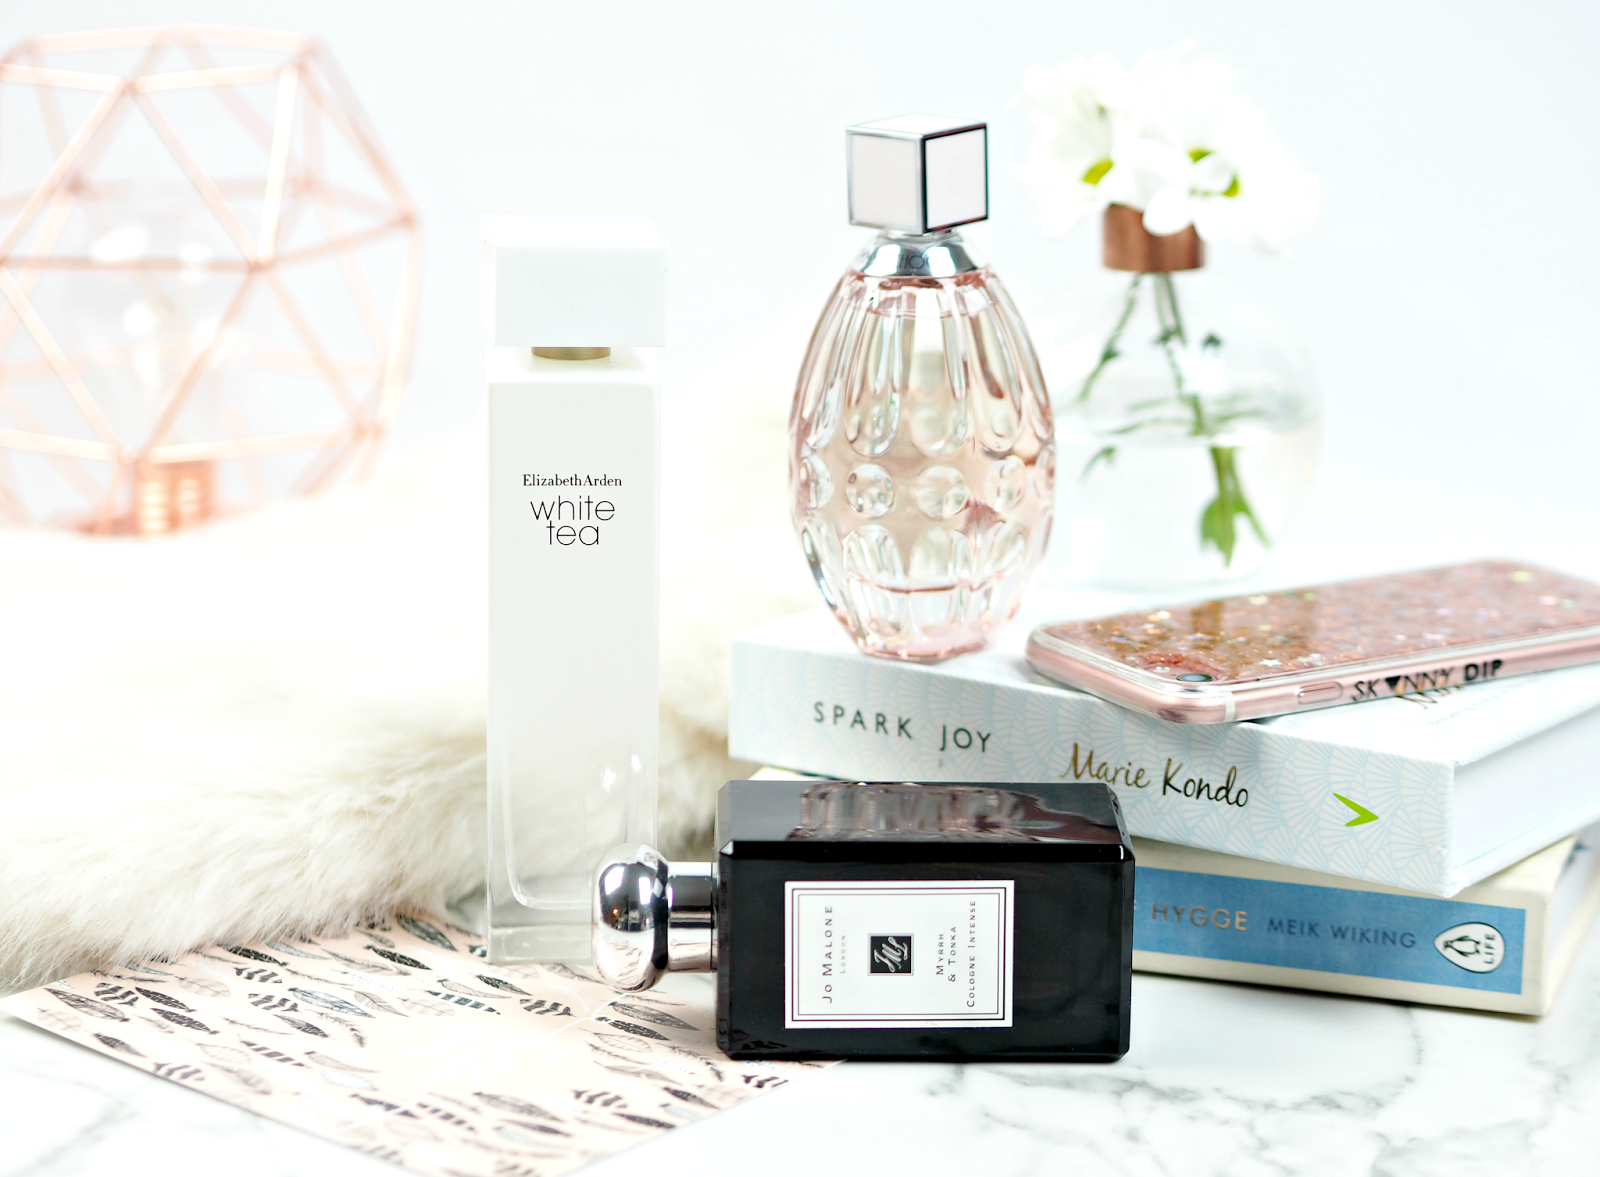 Be My Valentine" Three Beautiful New Scents For Spring You'll Want To Buy For Yourself